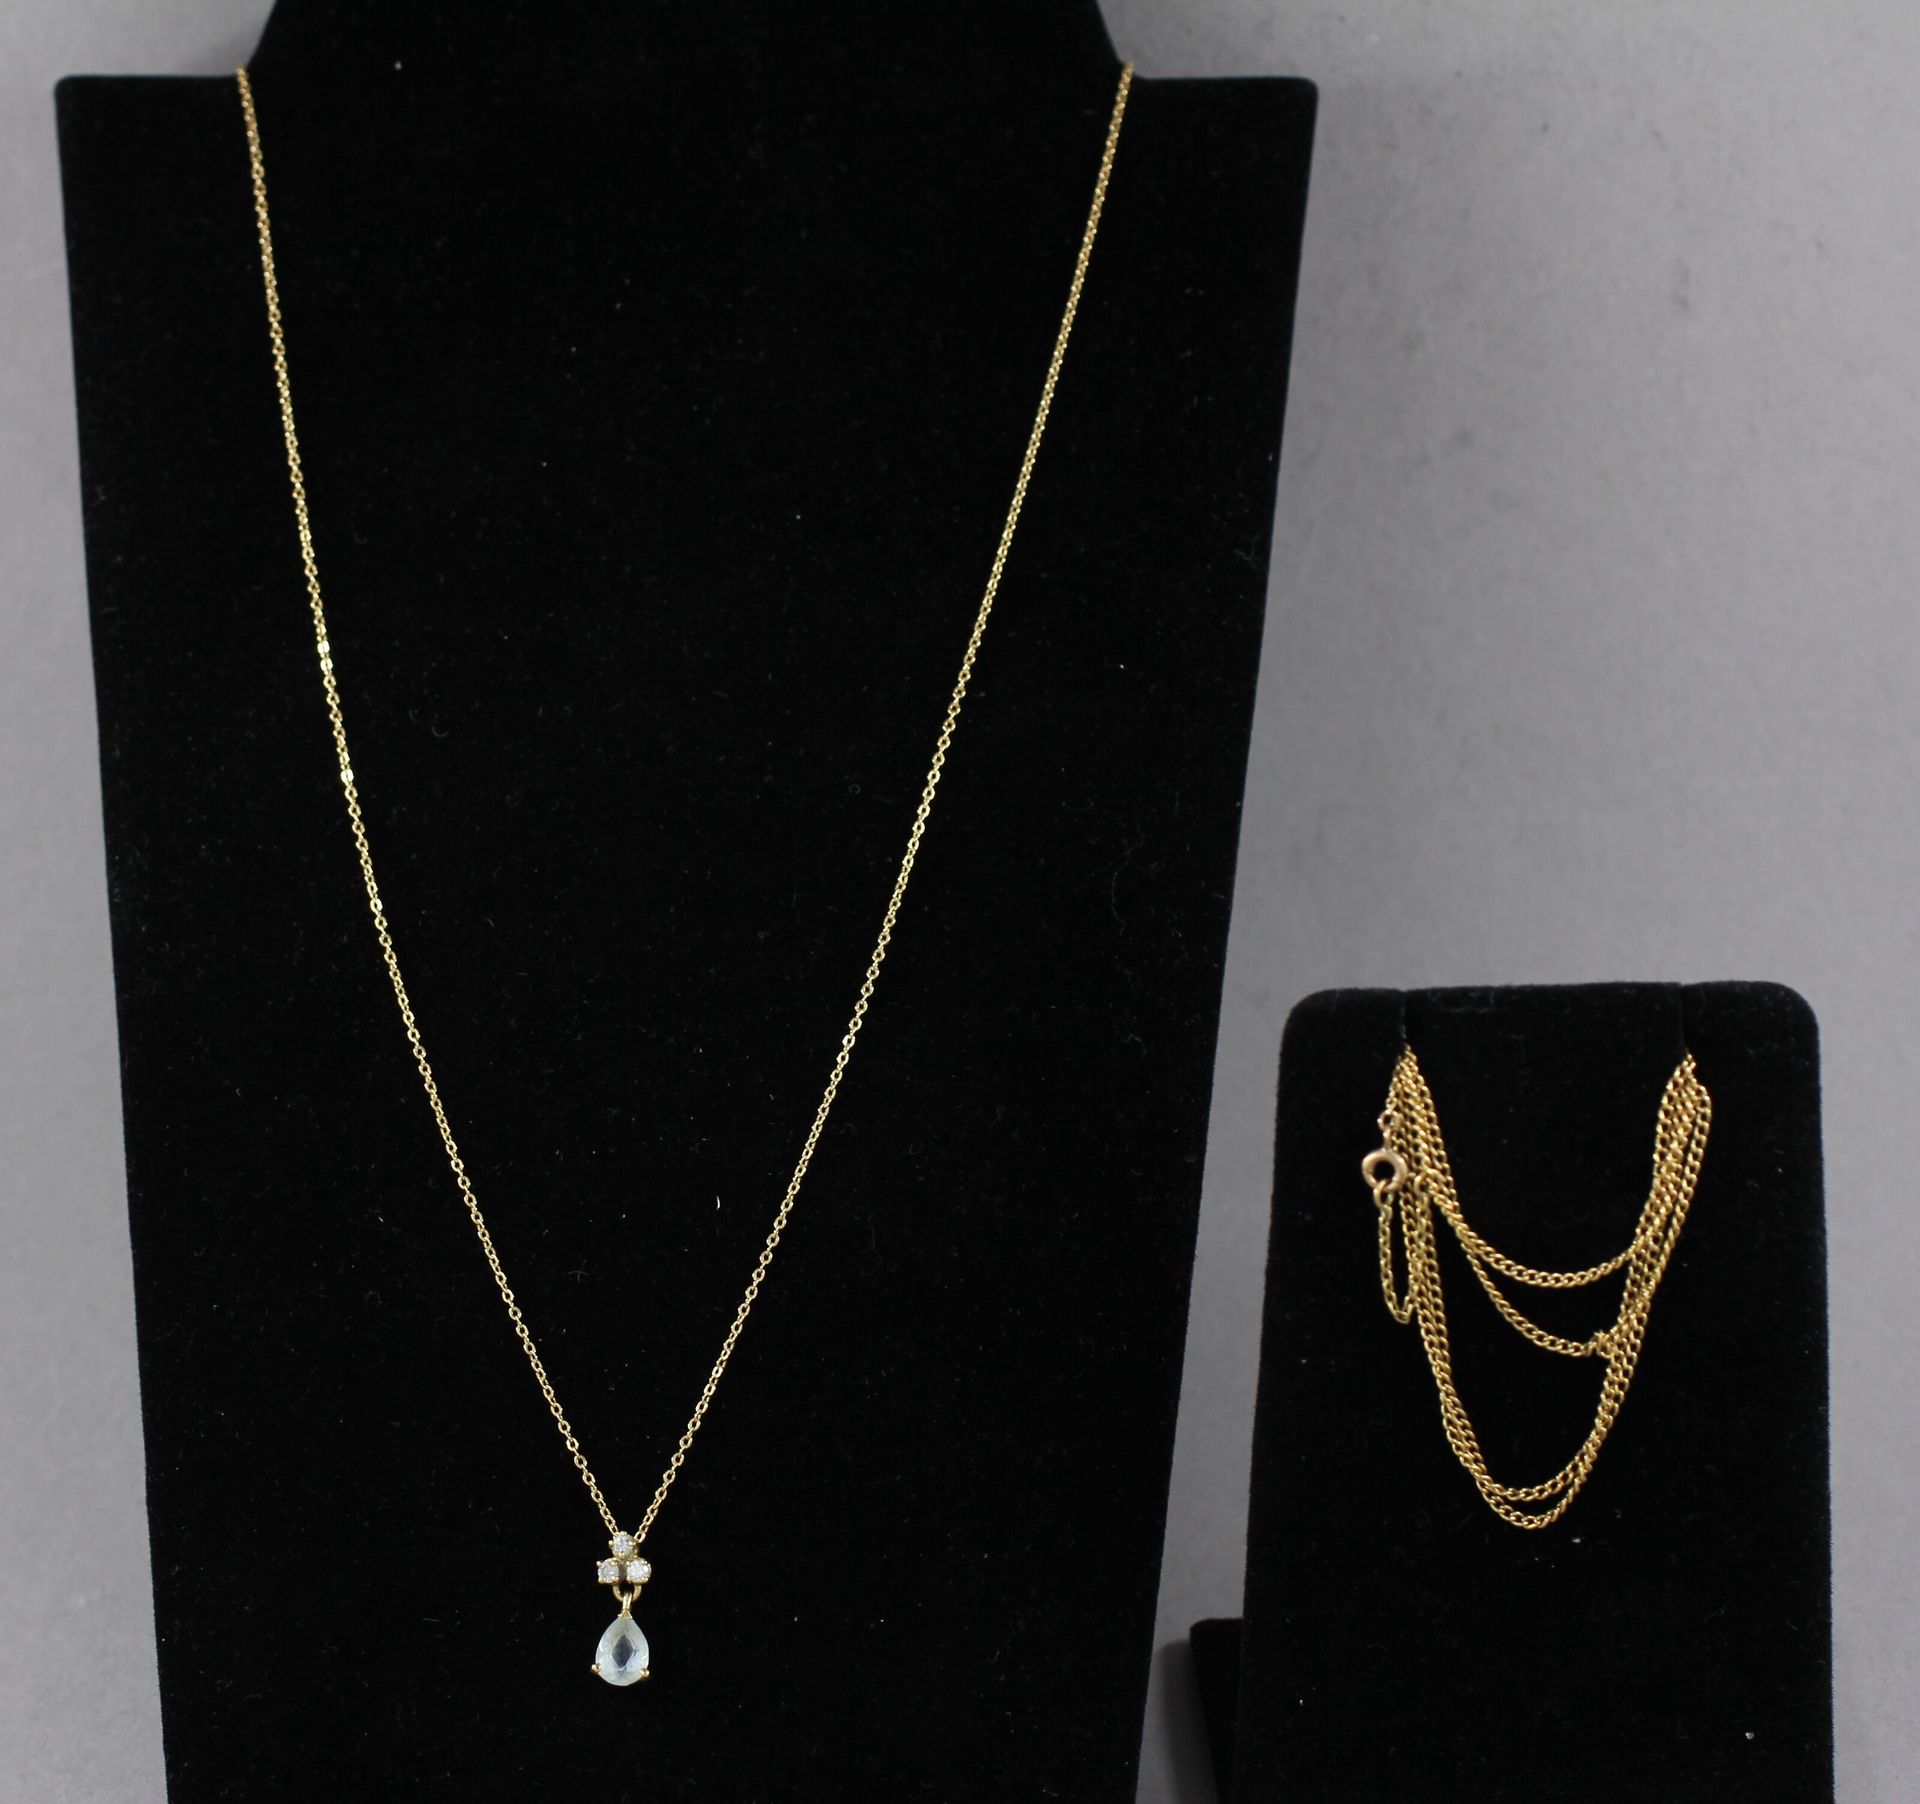 Null A neck chain in 18k yellow gold, pds: 3.7 g.

A necklace in 18k yellow gold&hellip;